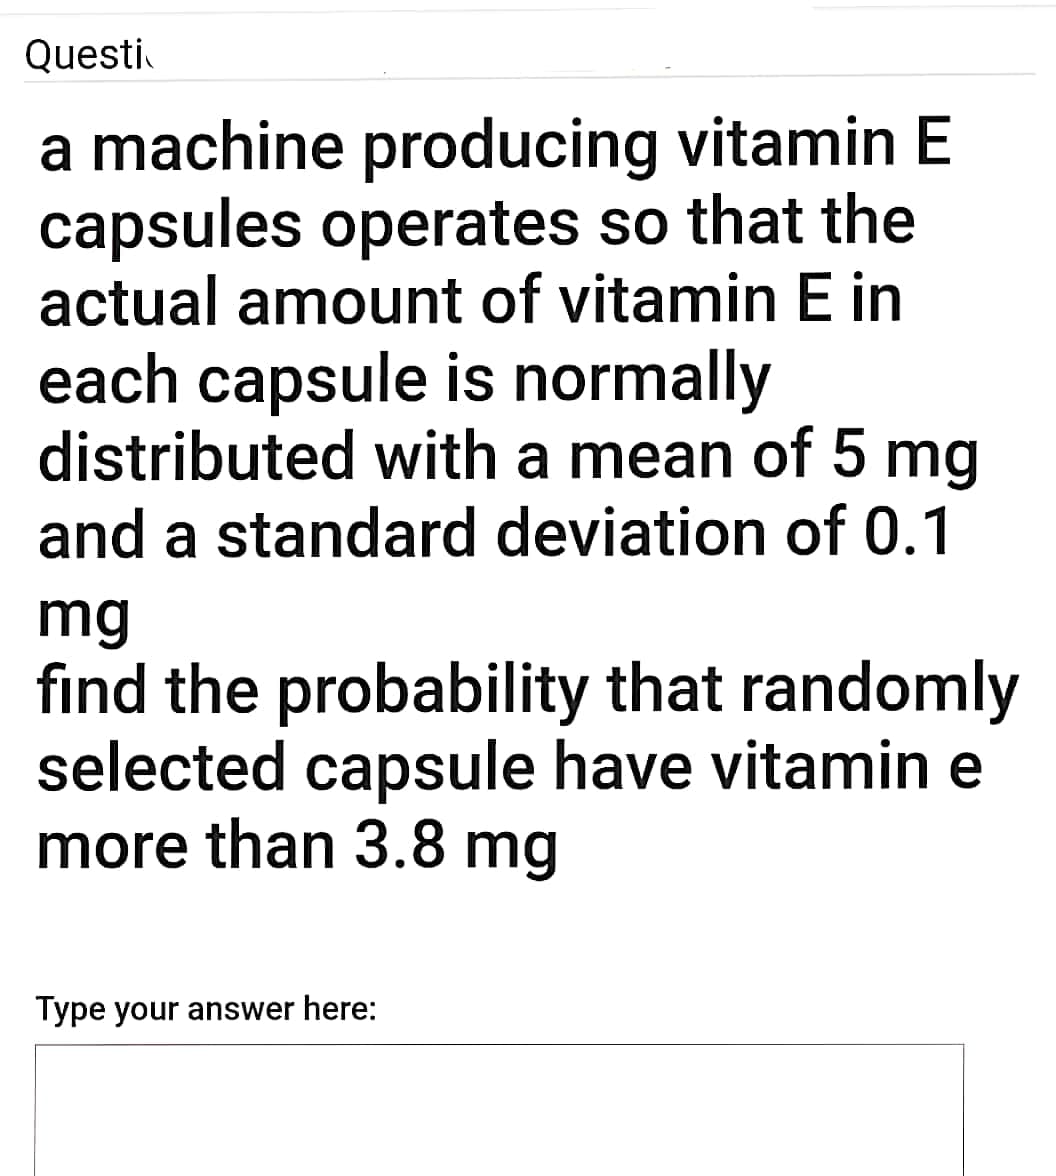 Questi
a machine producing vitamin E
capsules operates so that the
actual amount of vitamin E in
each capsule is normally
distributed with a mean of 5 mg
and a standard deviation of 0.1
mg
find the probability that randomly
selected capsule have vitamin e
more than 3.8 mg
Type your answer here:
